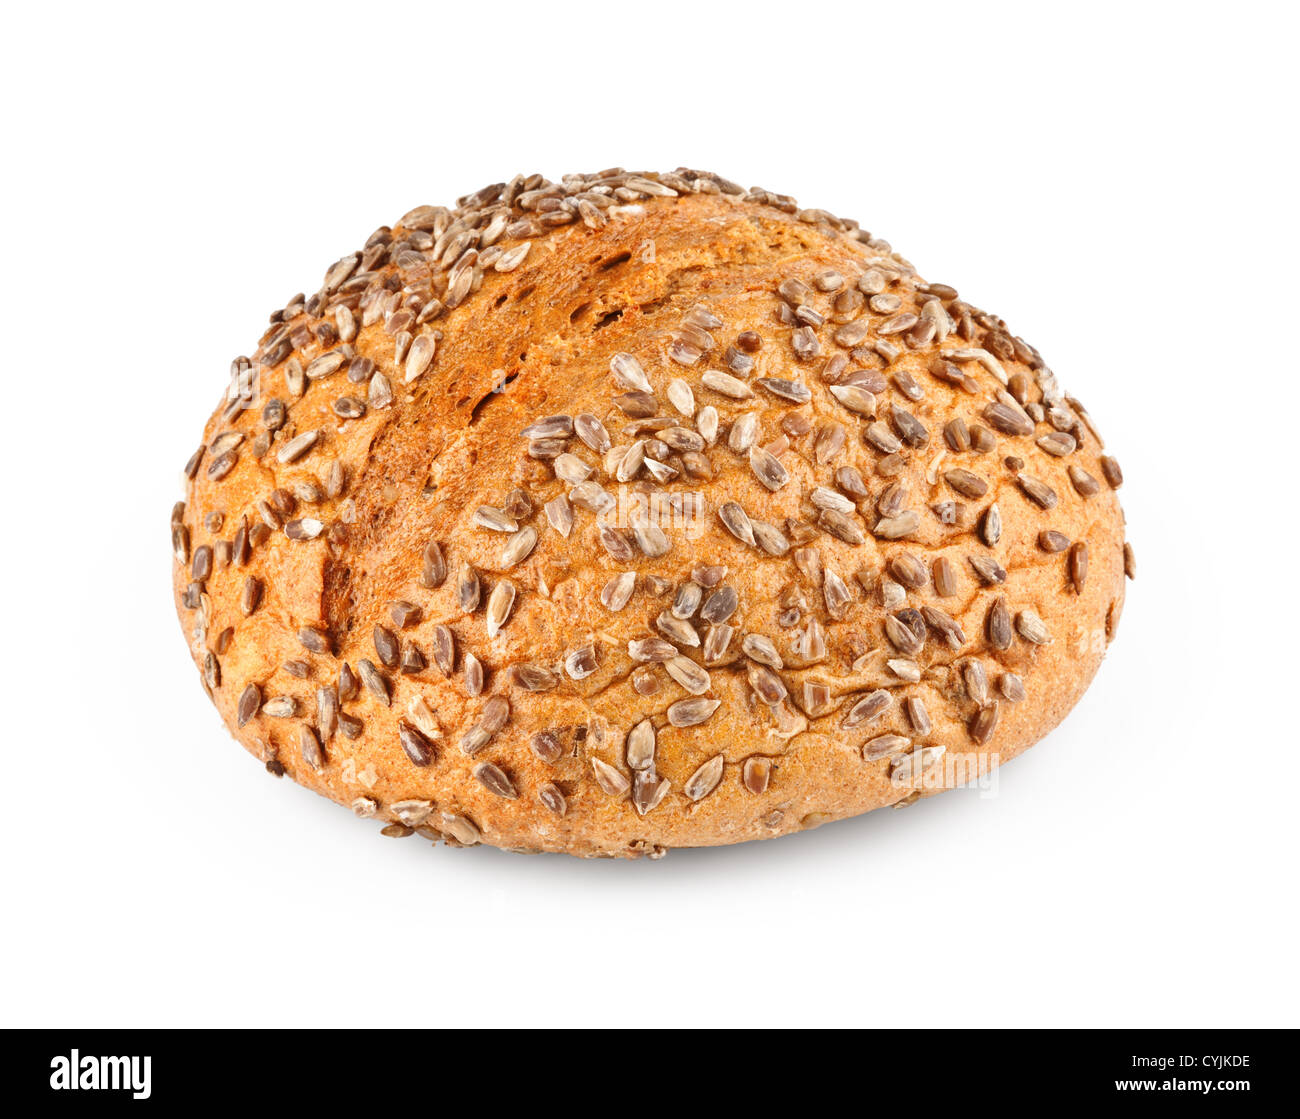 A loaf of homemade bread with sunflower seeds isolated on white background Stock Photo